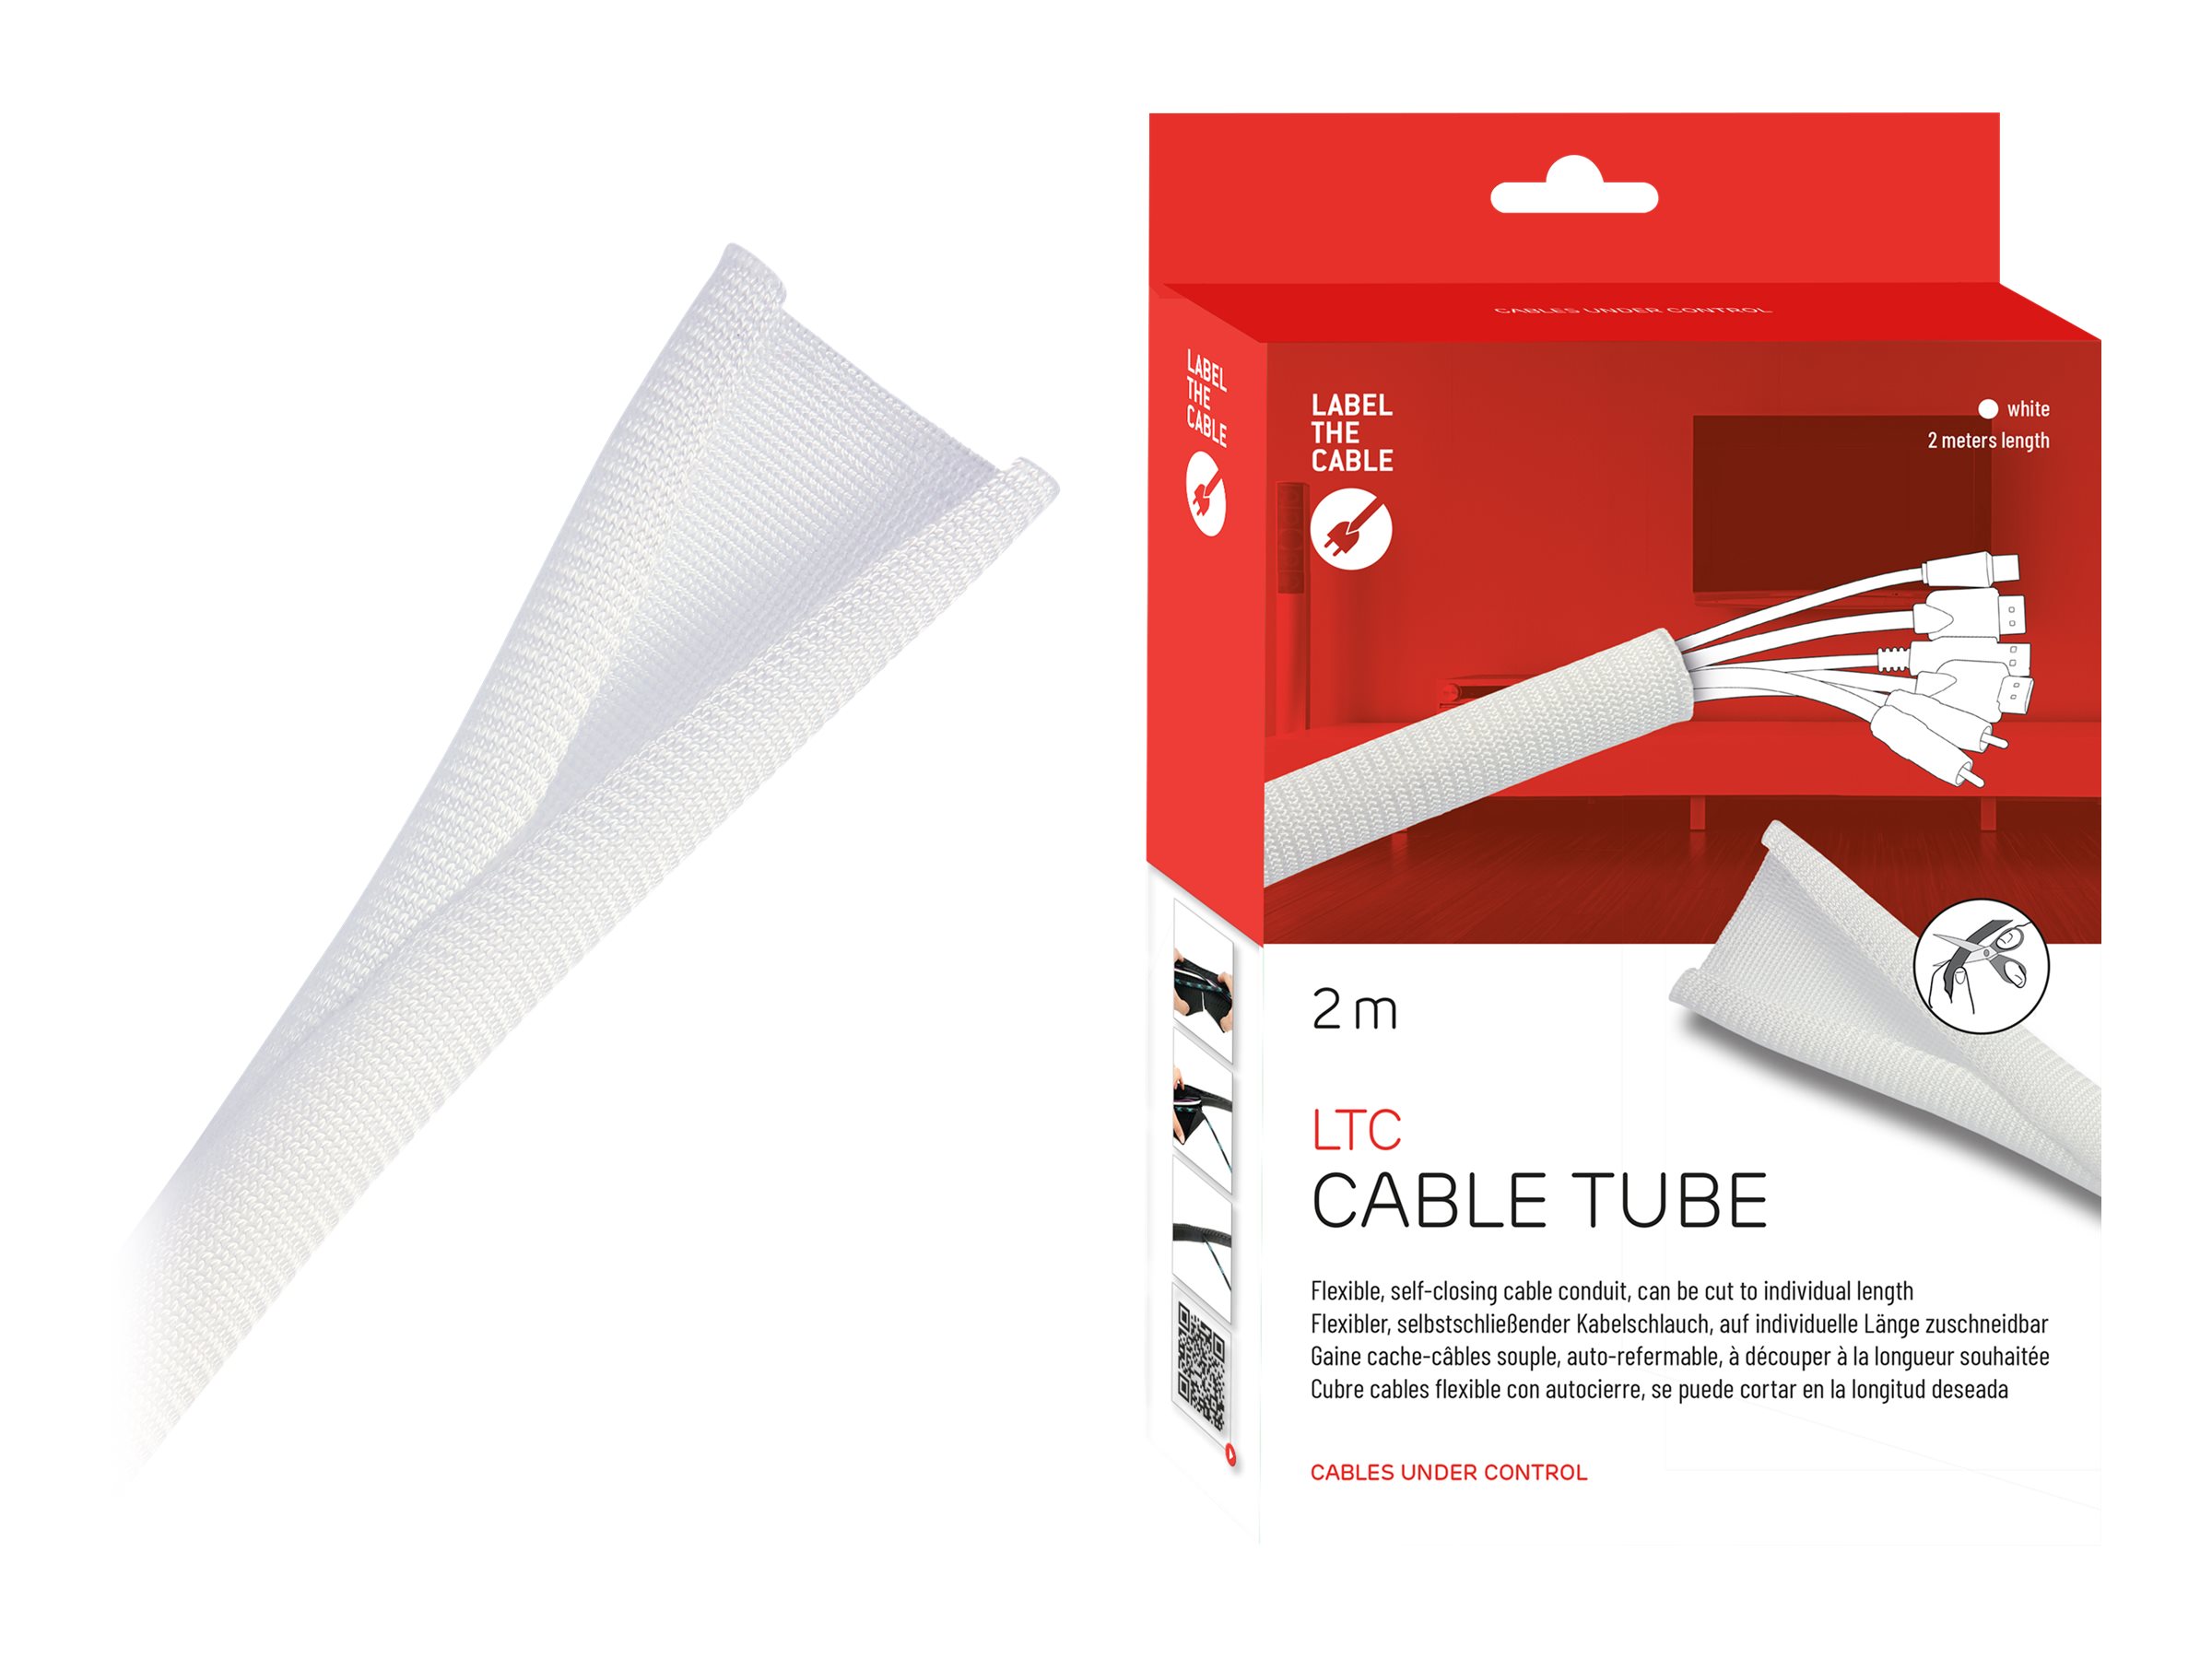 Label-the-cable LTC CABLE TUBE - Kabelschlauch - 2 m - weiß